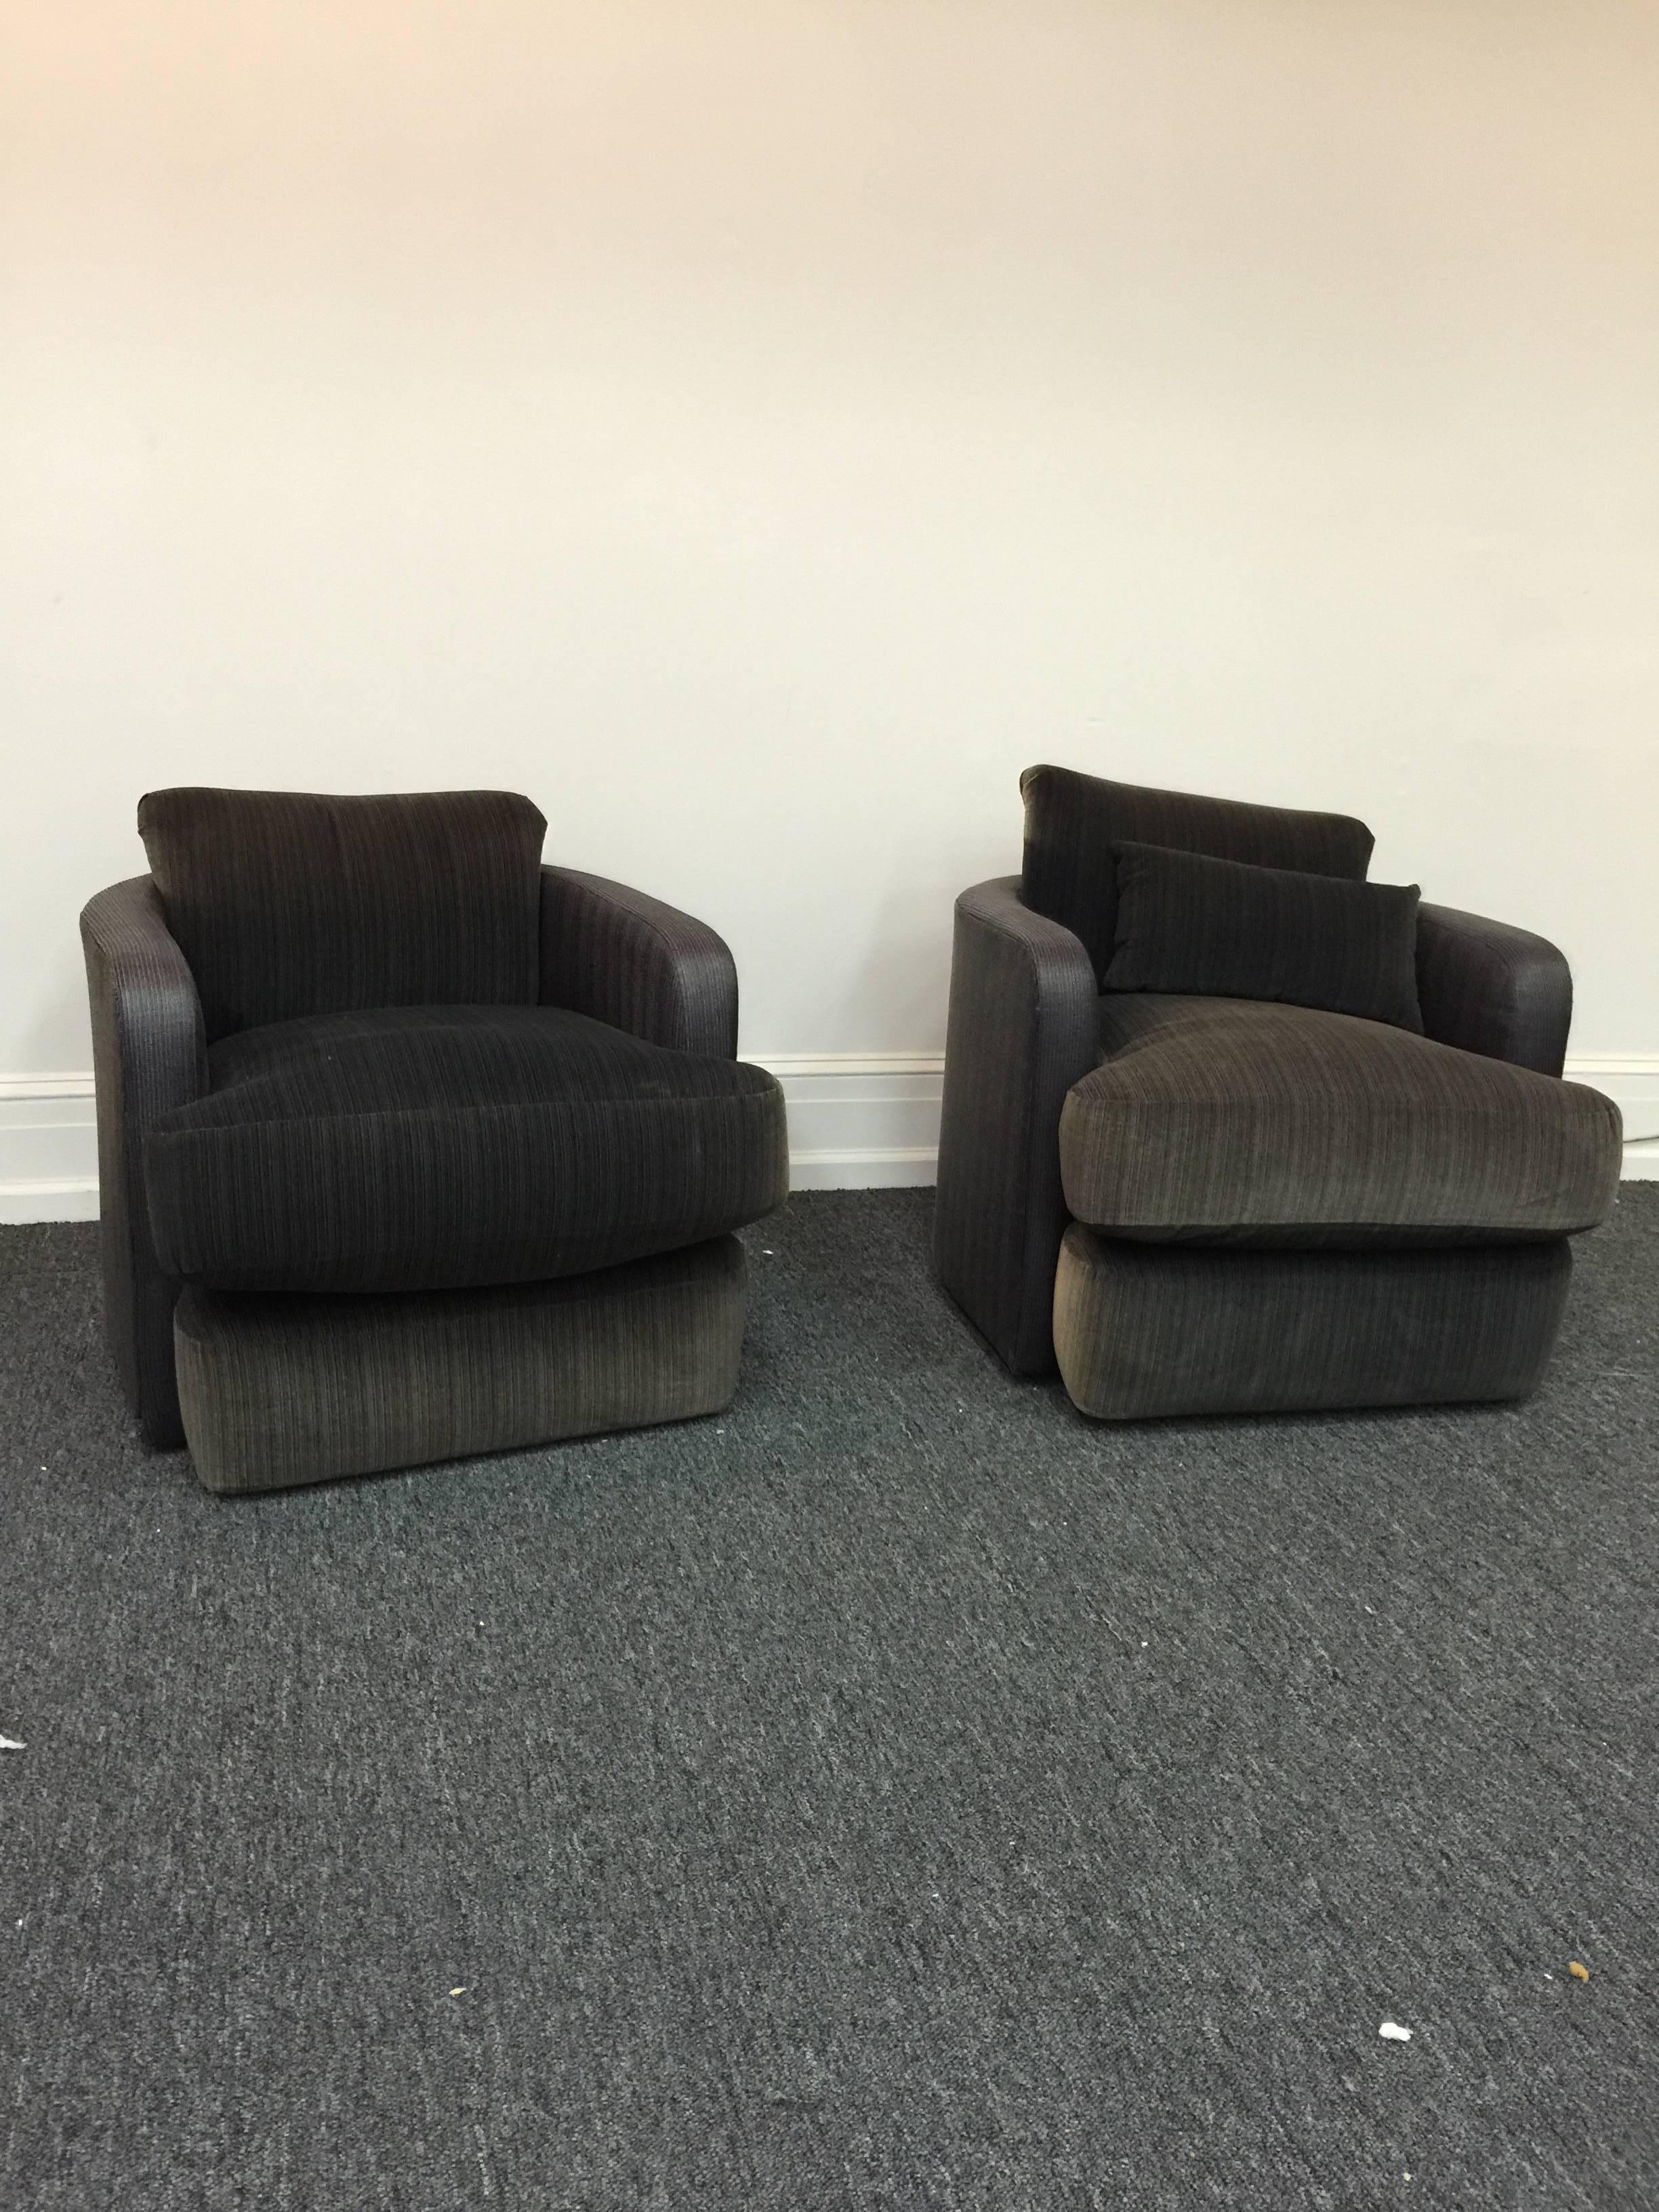 Pair of Milo Baughman Barrel Back Swivel Chairs In Good Condition For Sale In Mount Penn, PA